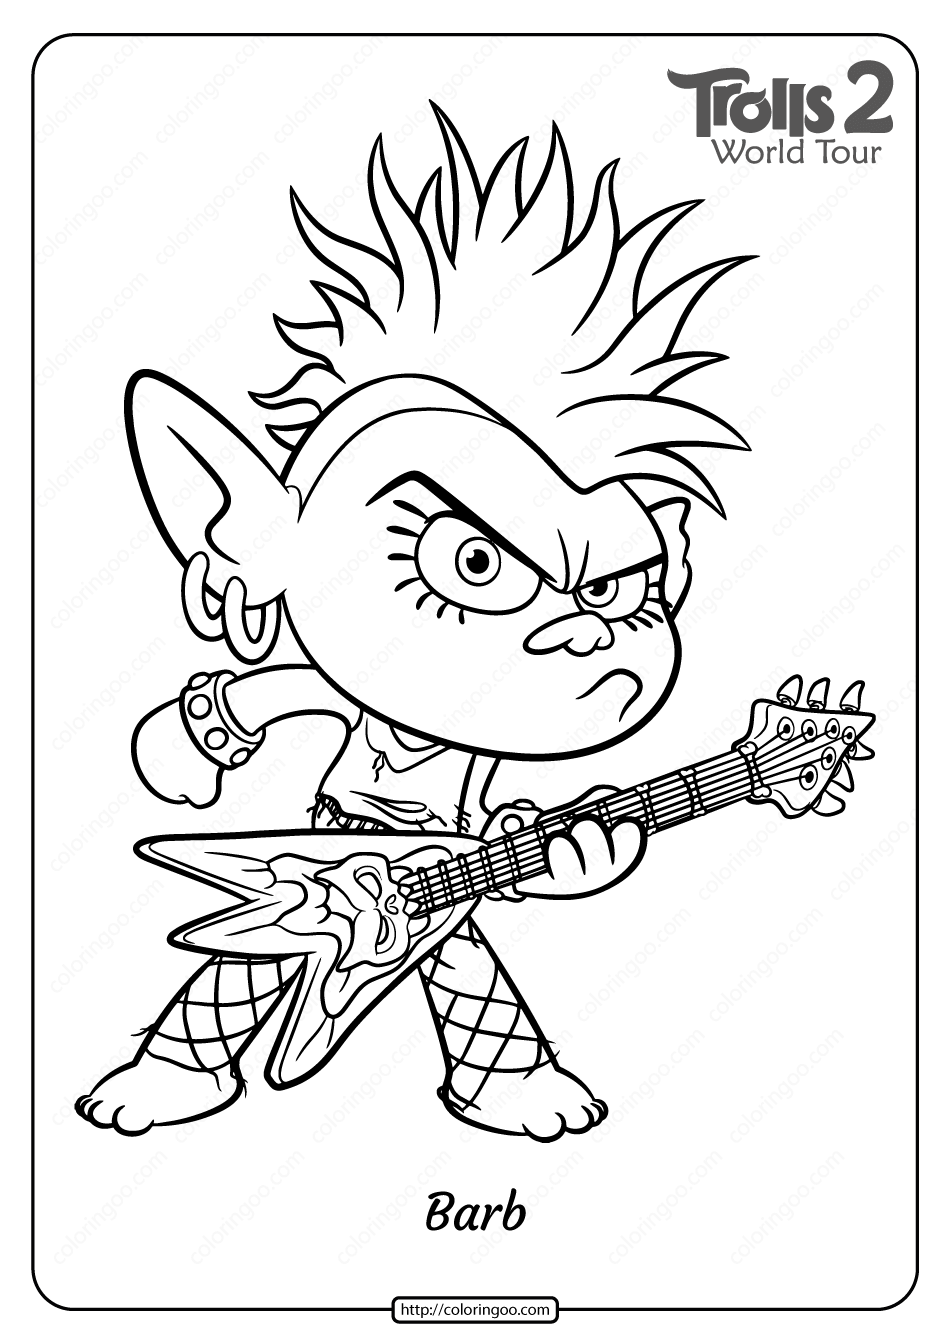 Free Printable Trolls 2 Queen Barb Pdf Coloring Page